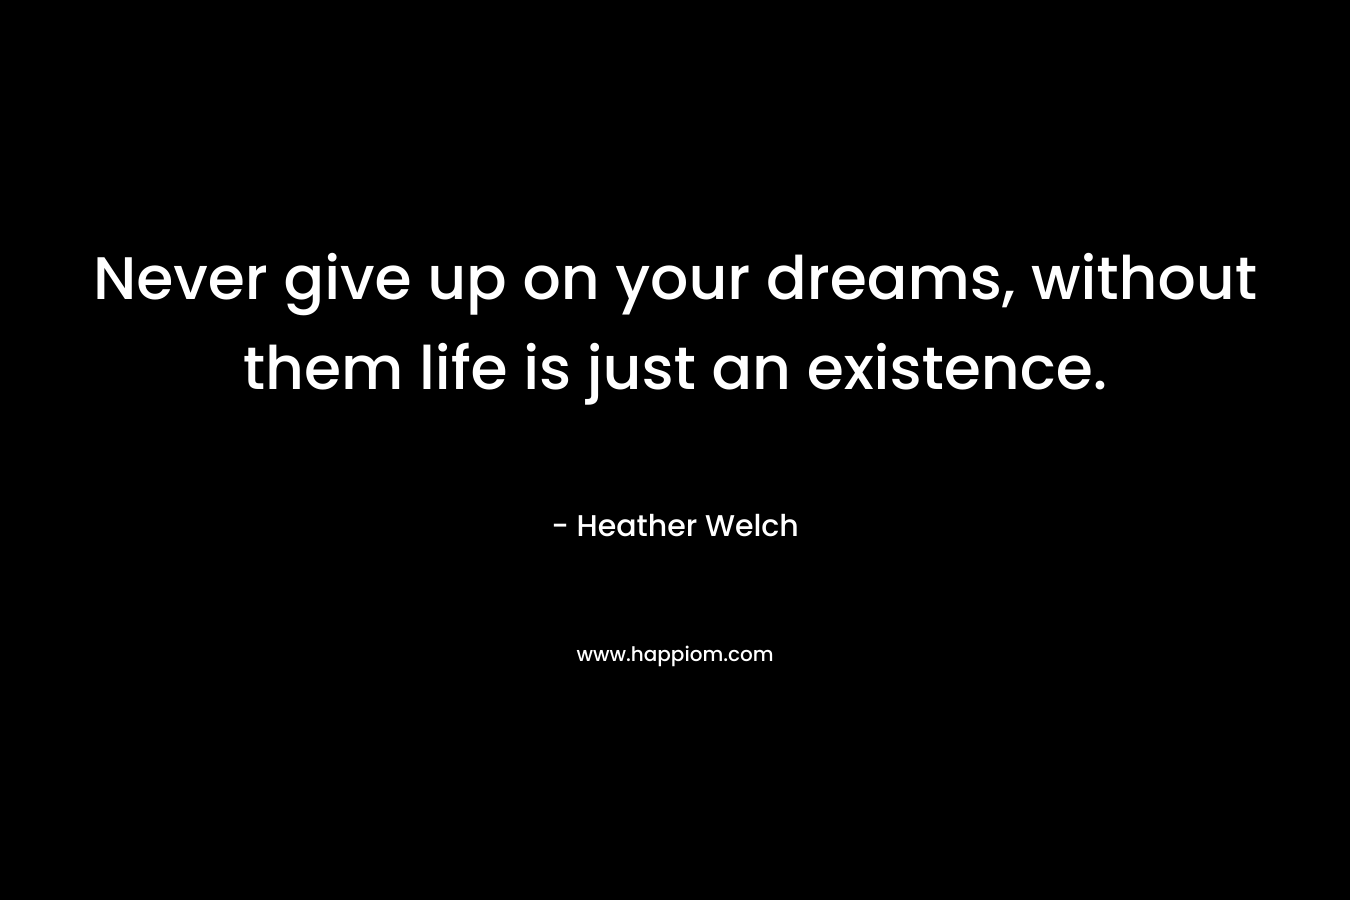 Never give up on your dreams, without them life is just an existence. – Heather Welch